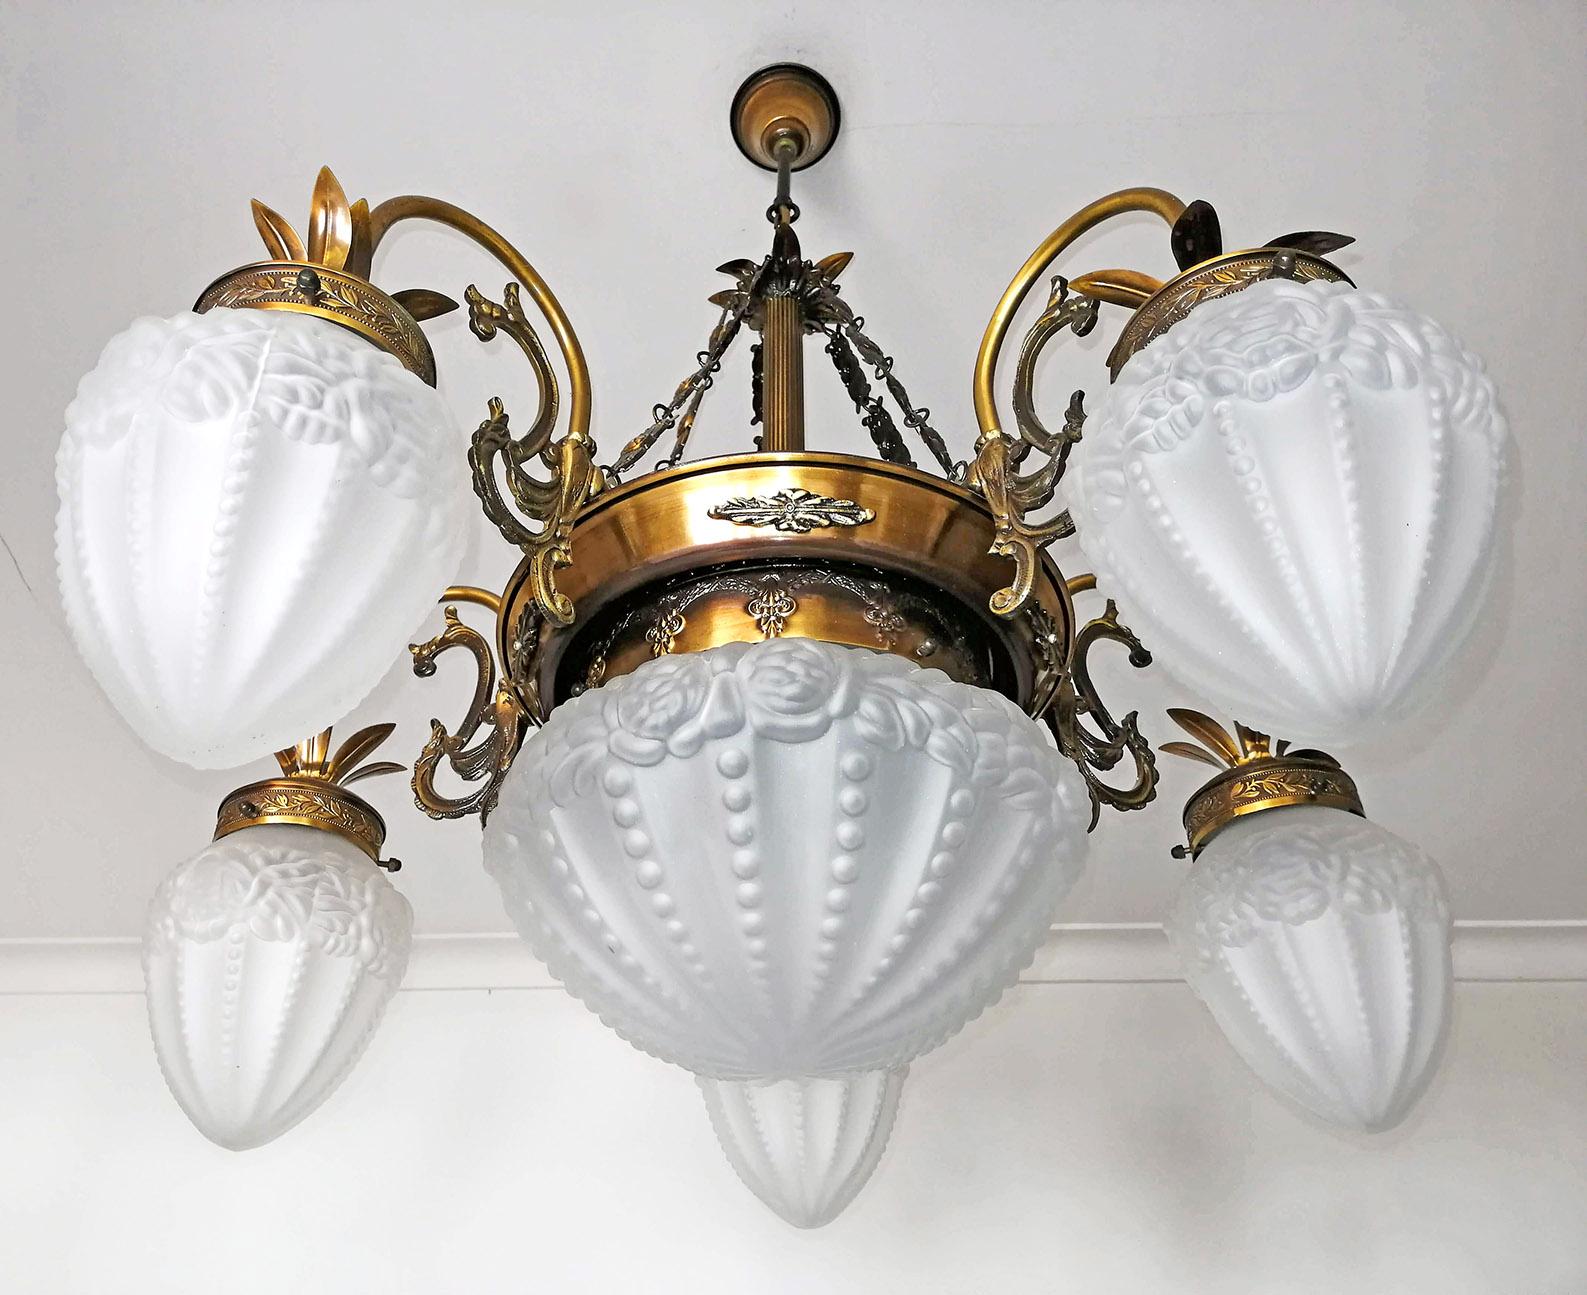 French Degué style Art Deco white frosted glass, six-light brass chandelier/ gold and bronze color with patina.
Six bulbs (five bulbs E14 40W + one bulb E27 60W)
Good working condition / European rewired
Measures: Diameter 28.5 in / 72 cm
Height